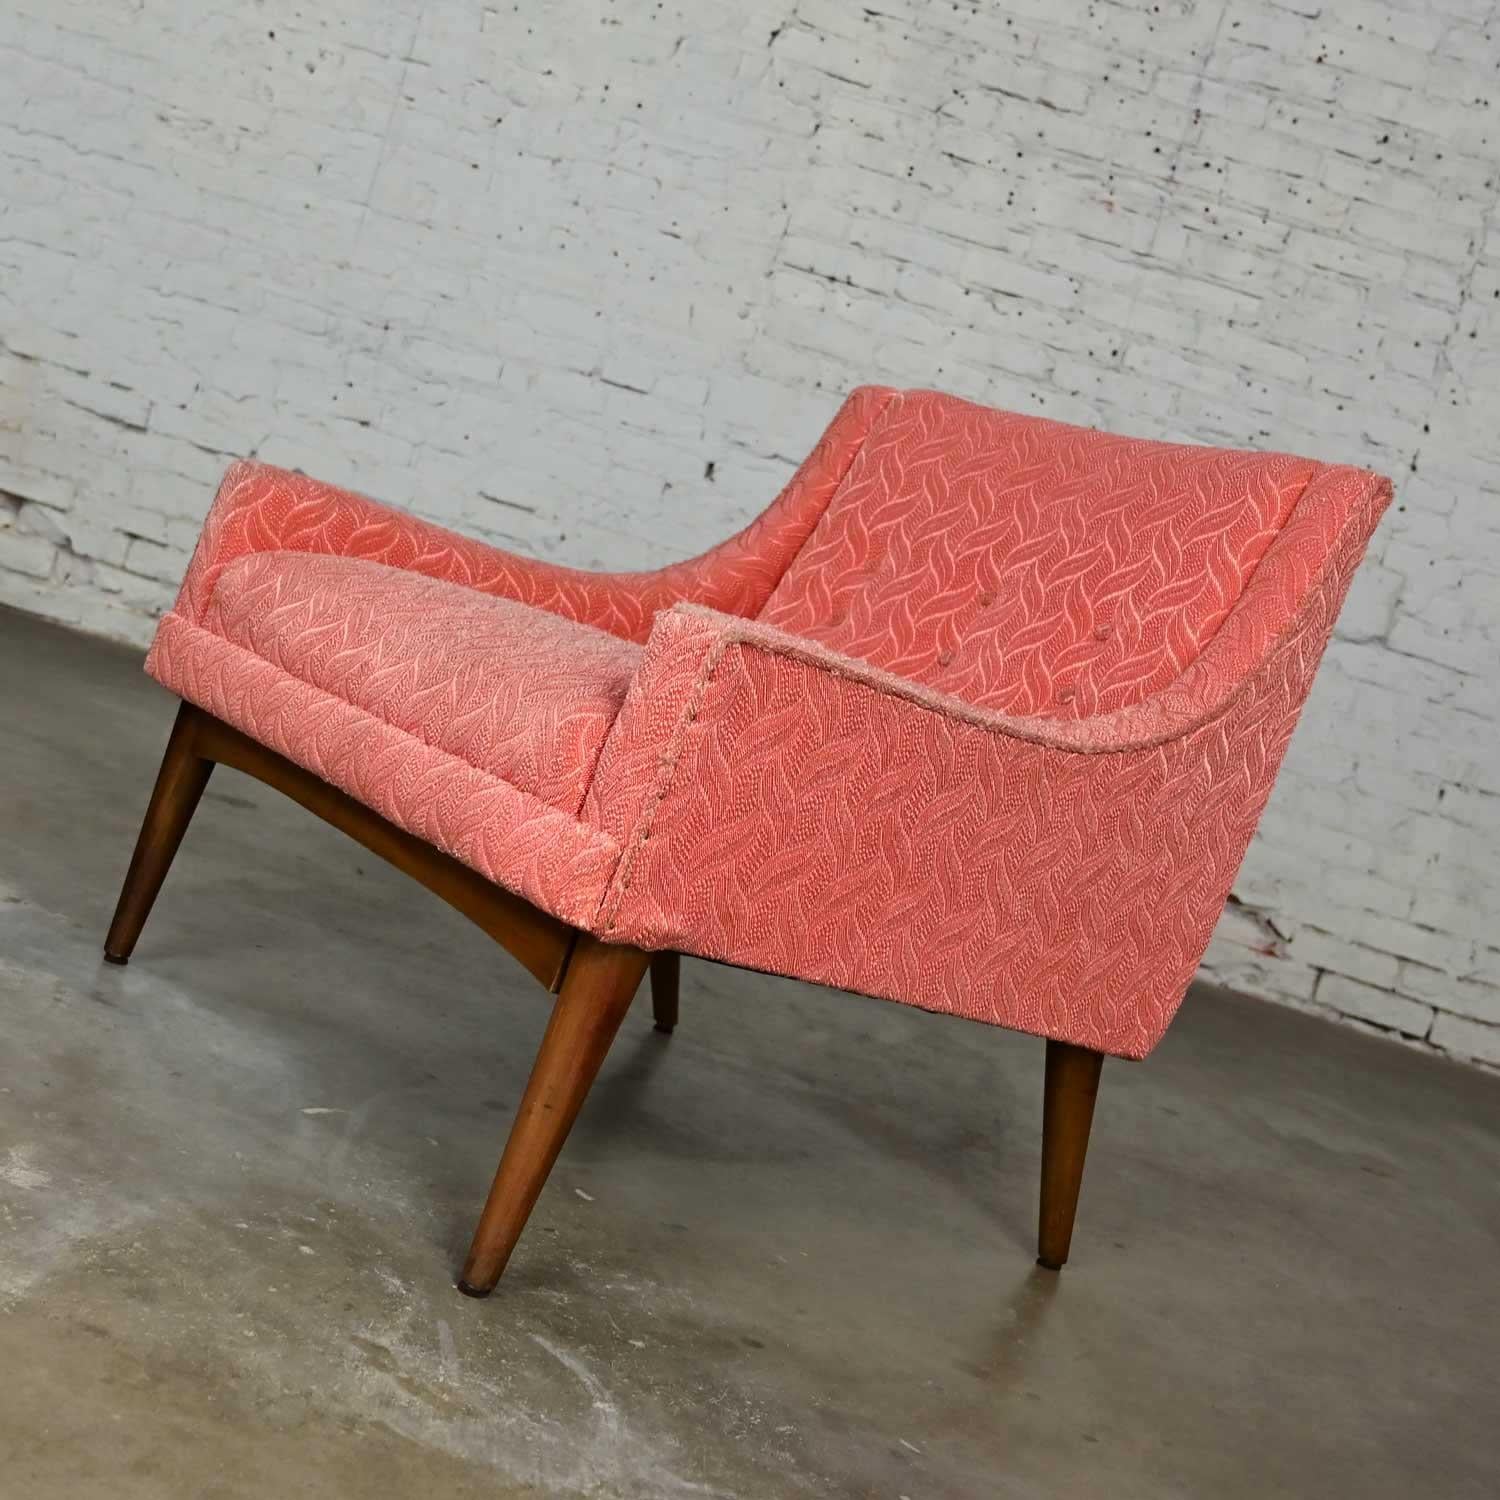 American Vintage Mid-Century Modern Coral Frieze Upholstered Modified Slipper Chair For Sale